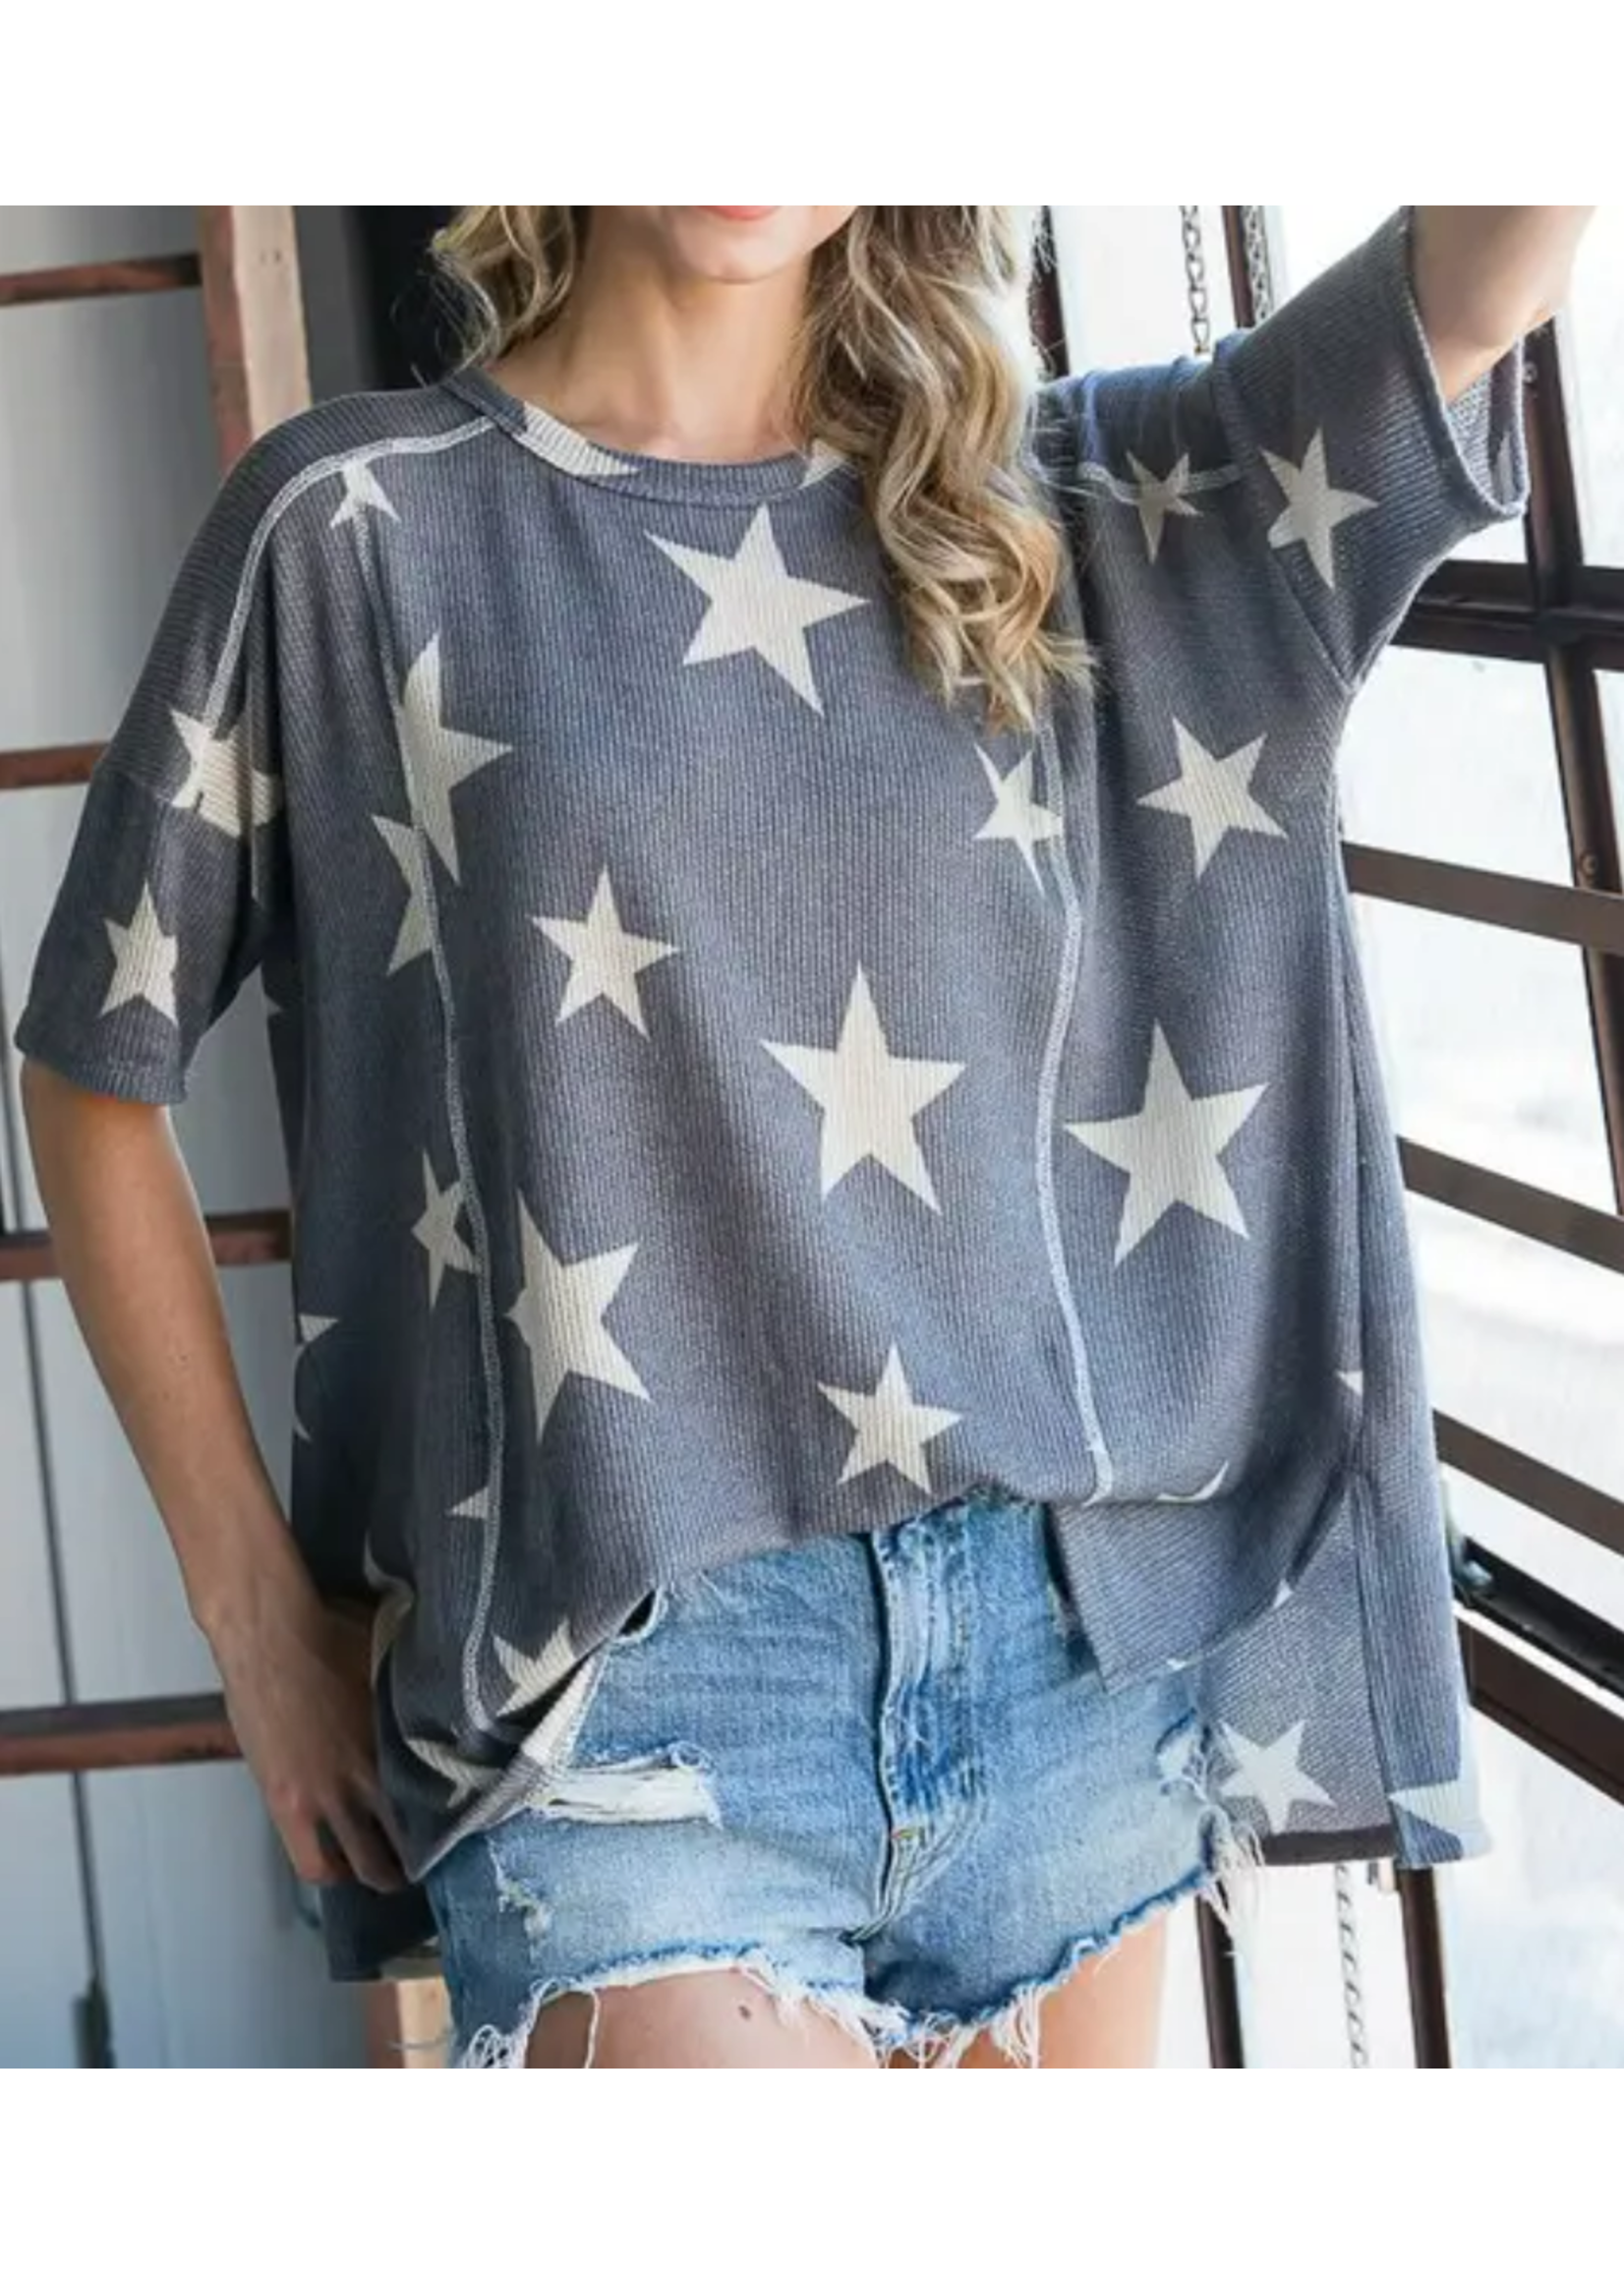 You Are A Shooting Star Stonewashed Star Top